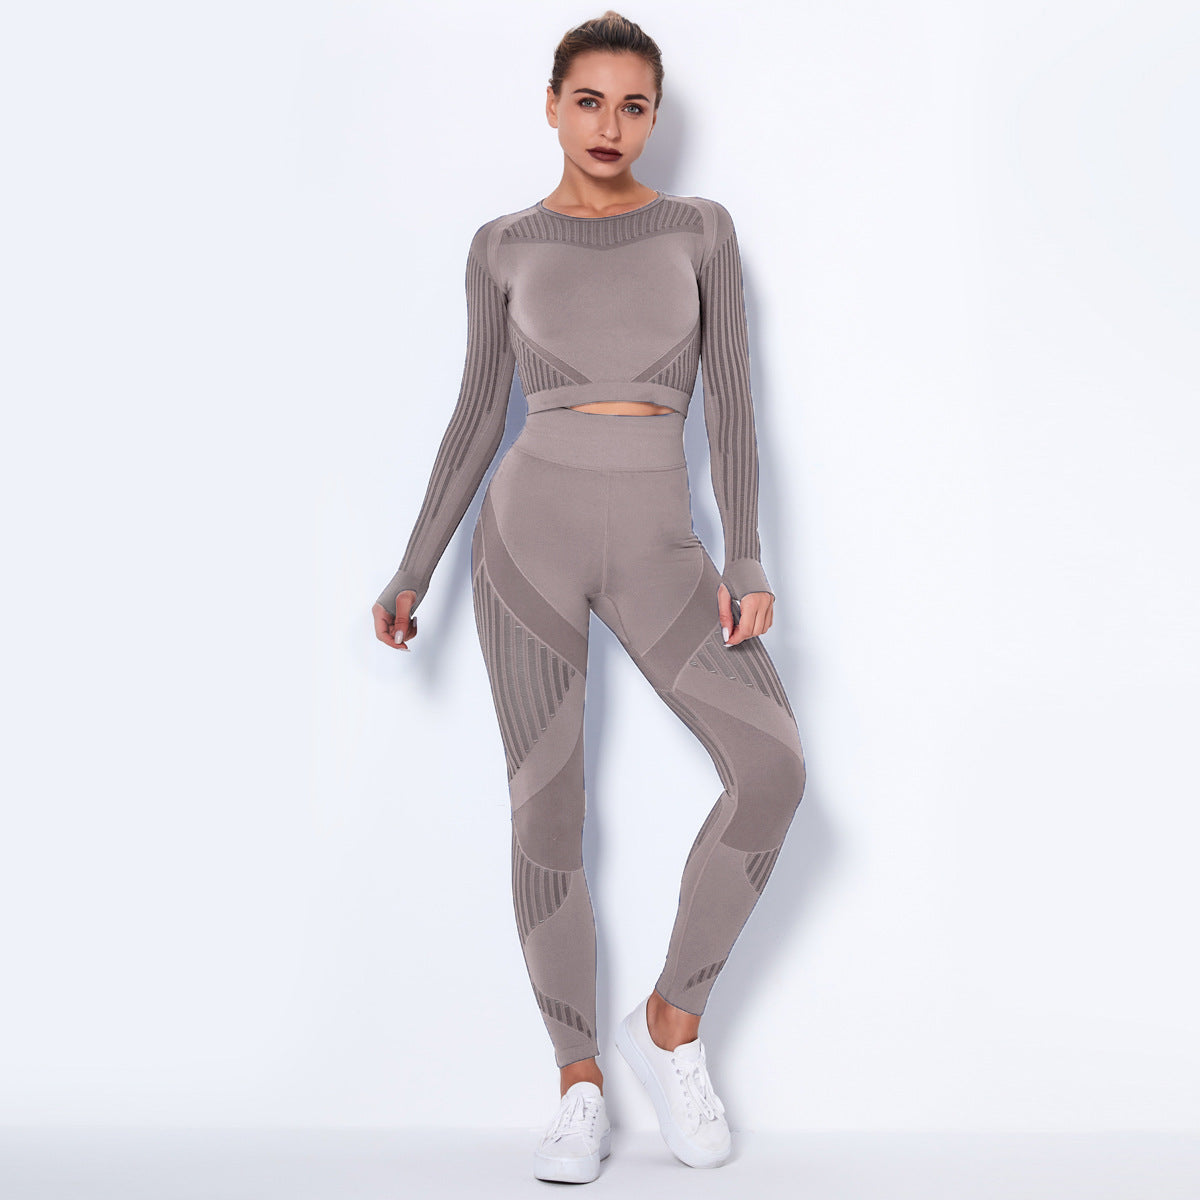 Seamless Knitted Absorbent Yoga Long-Sleeved Suit Yoga Wearsuit Angelwarriorfitness.com